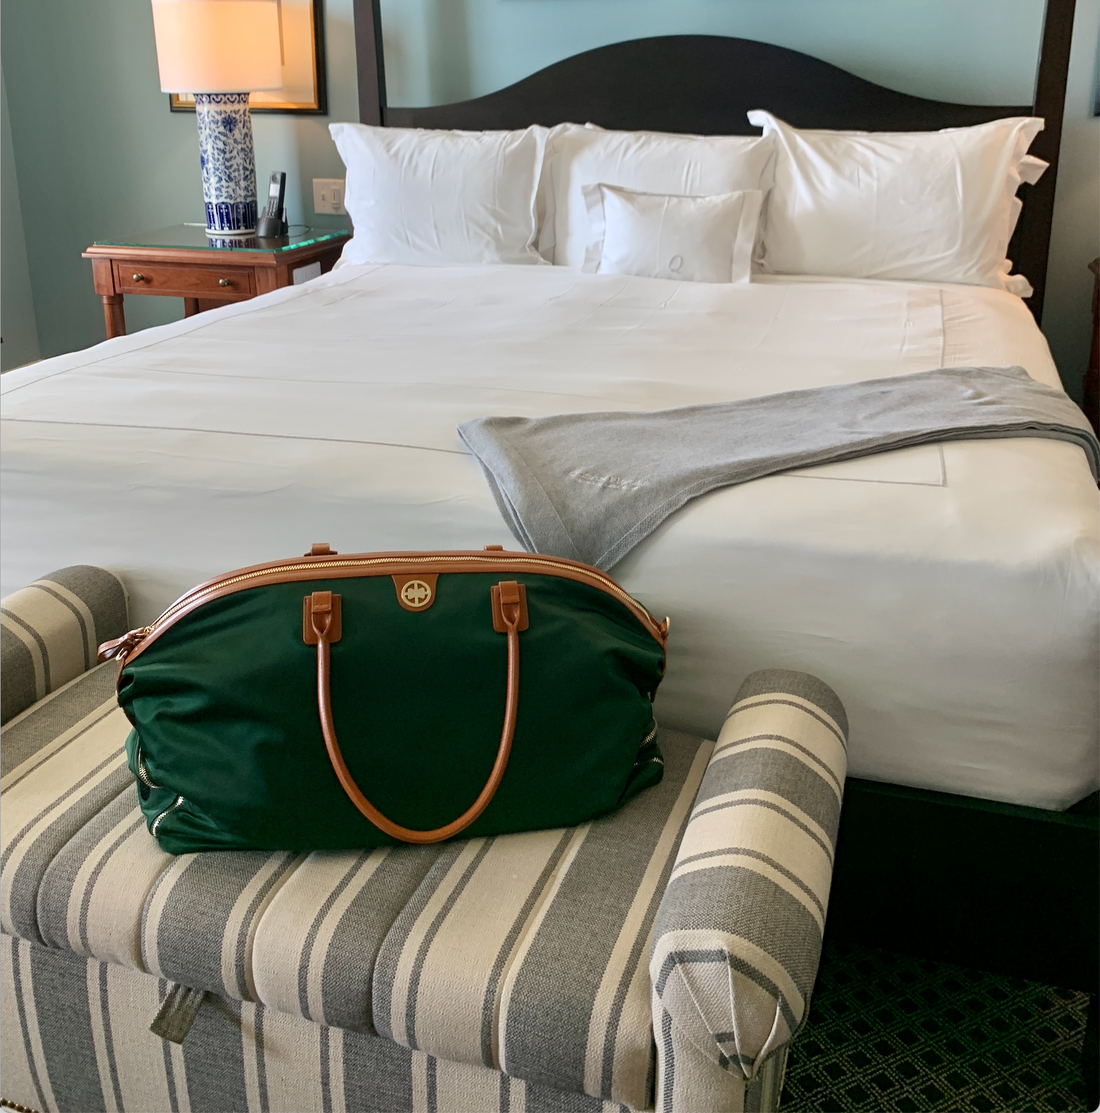 3 Benefits of Taking a Luxury Bag on Staycation